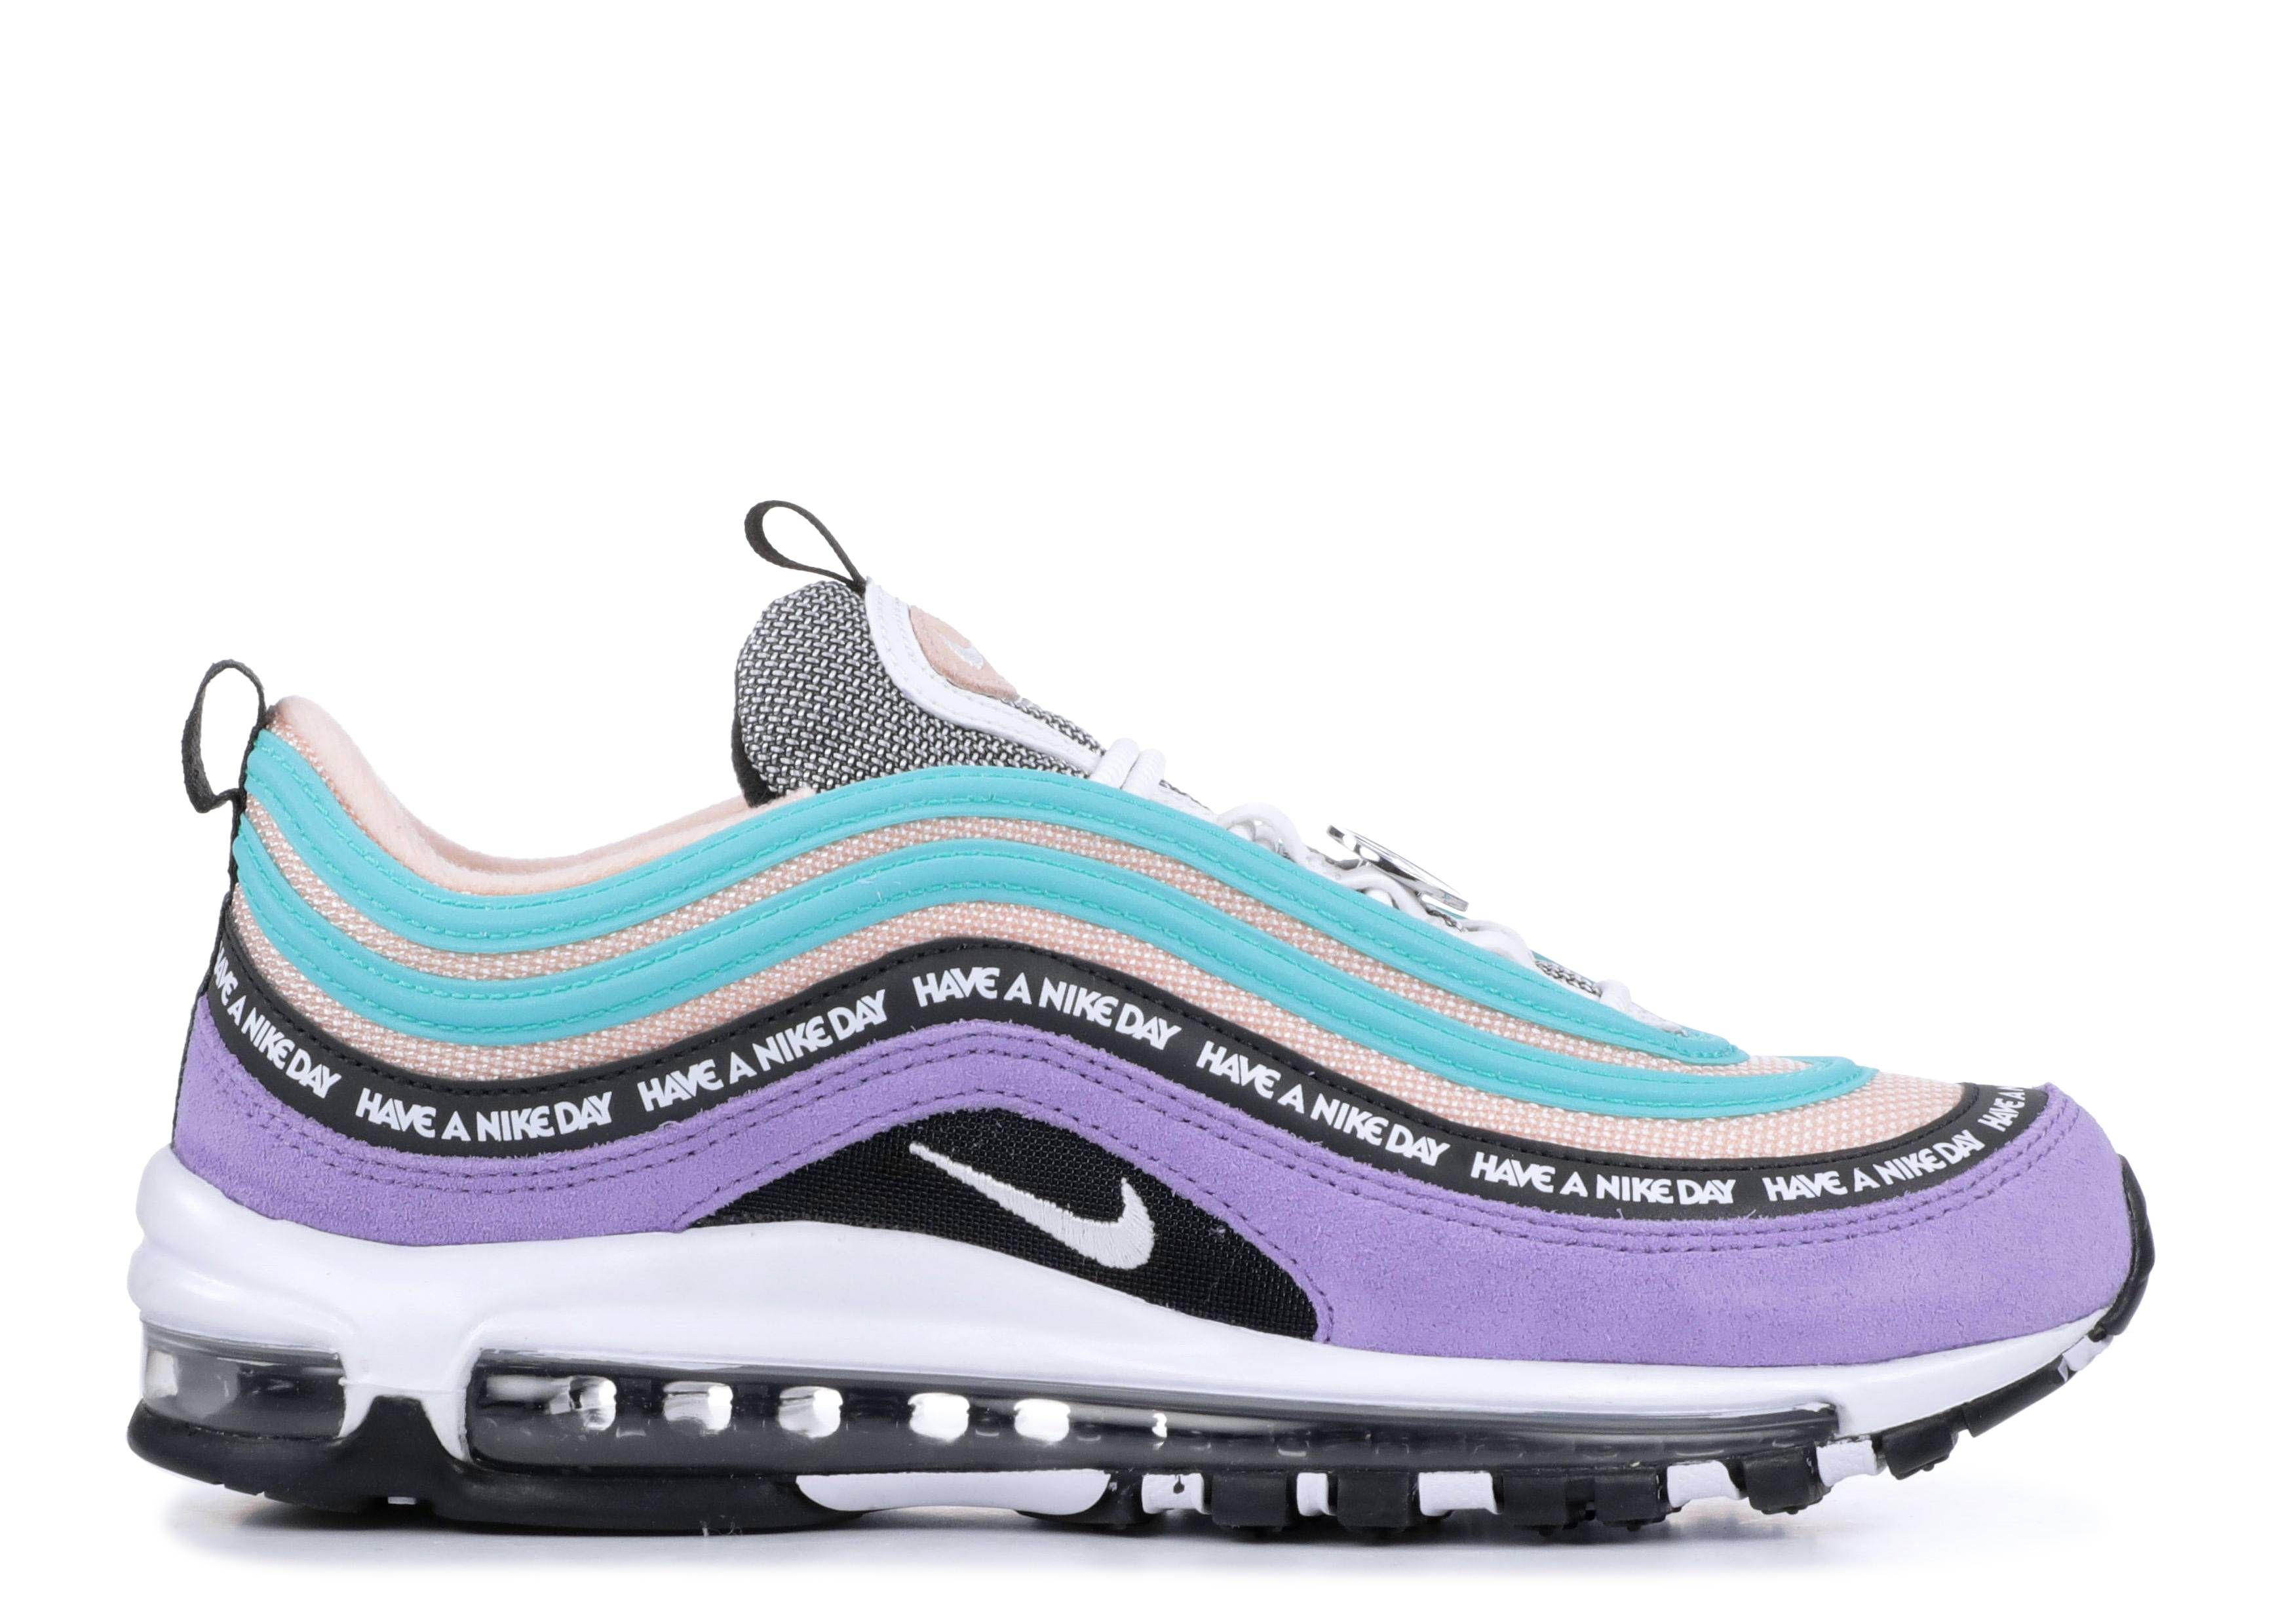 Air Max 97 ND (Have a Nike Day)